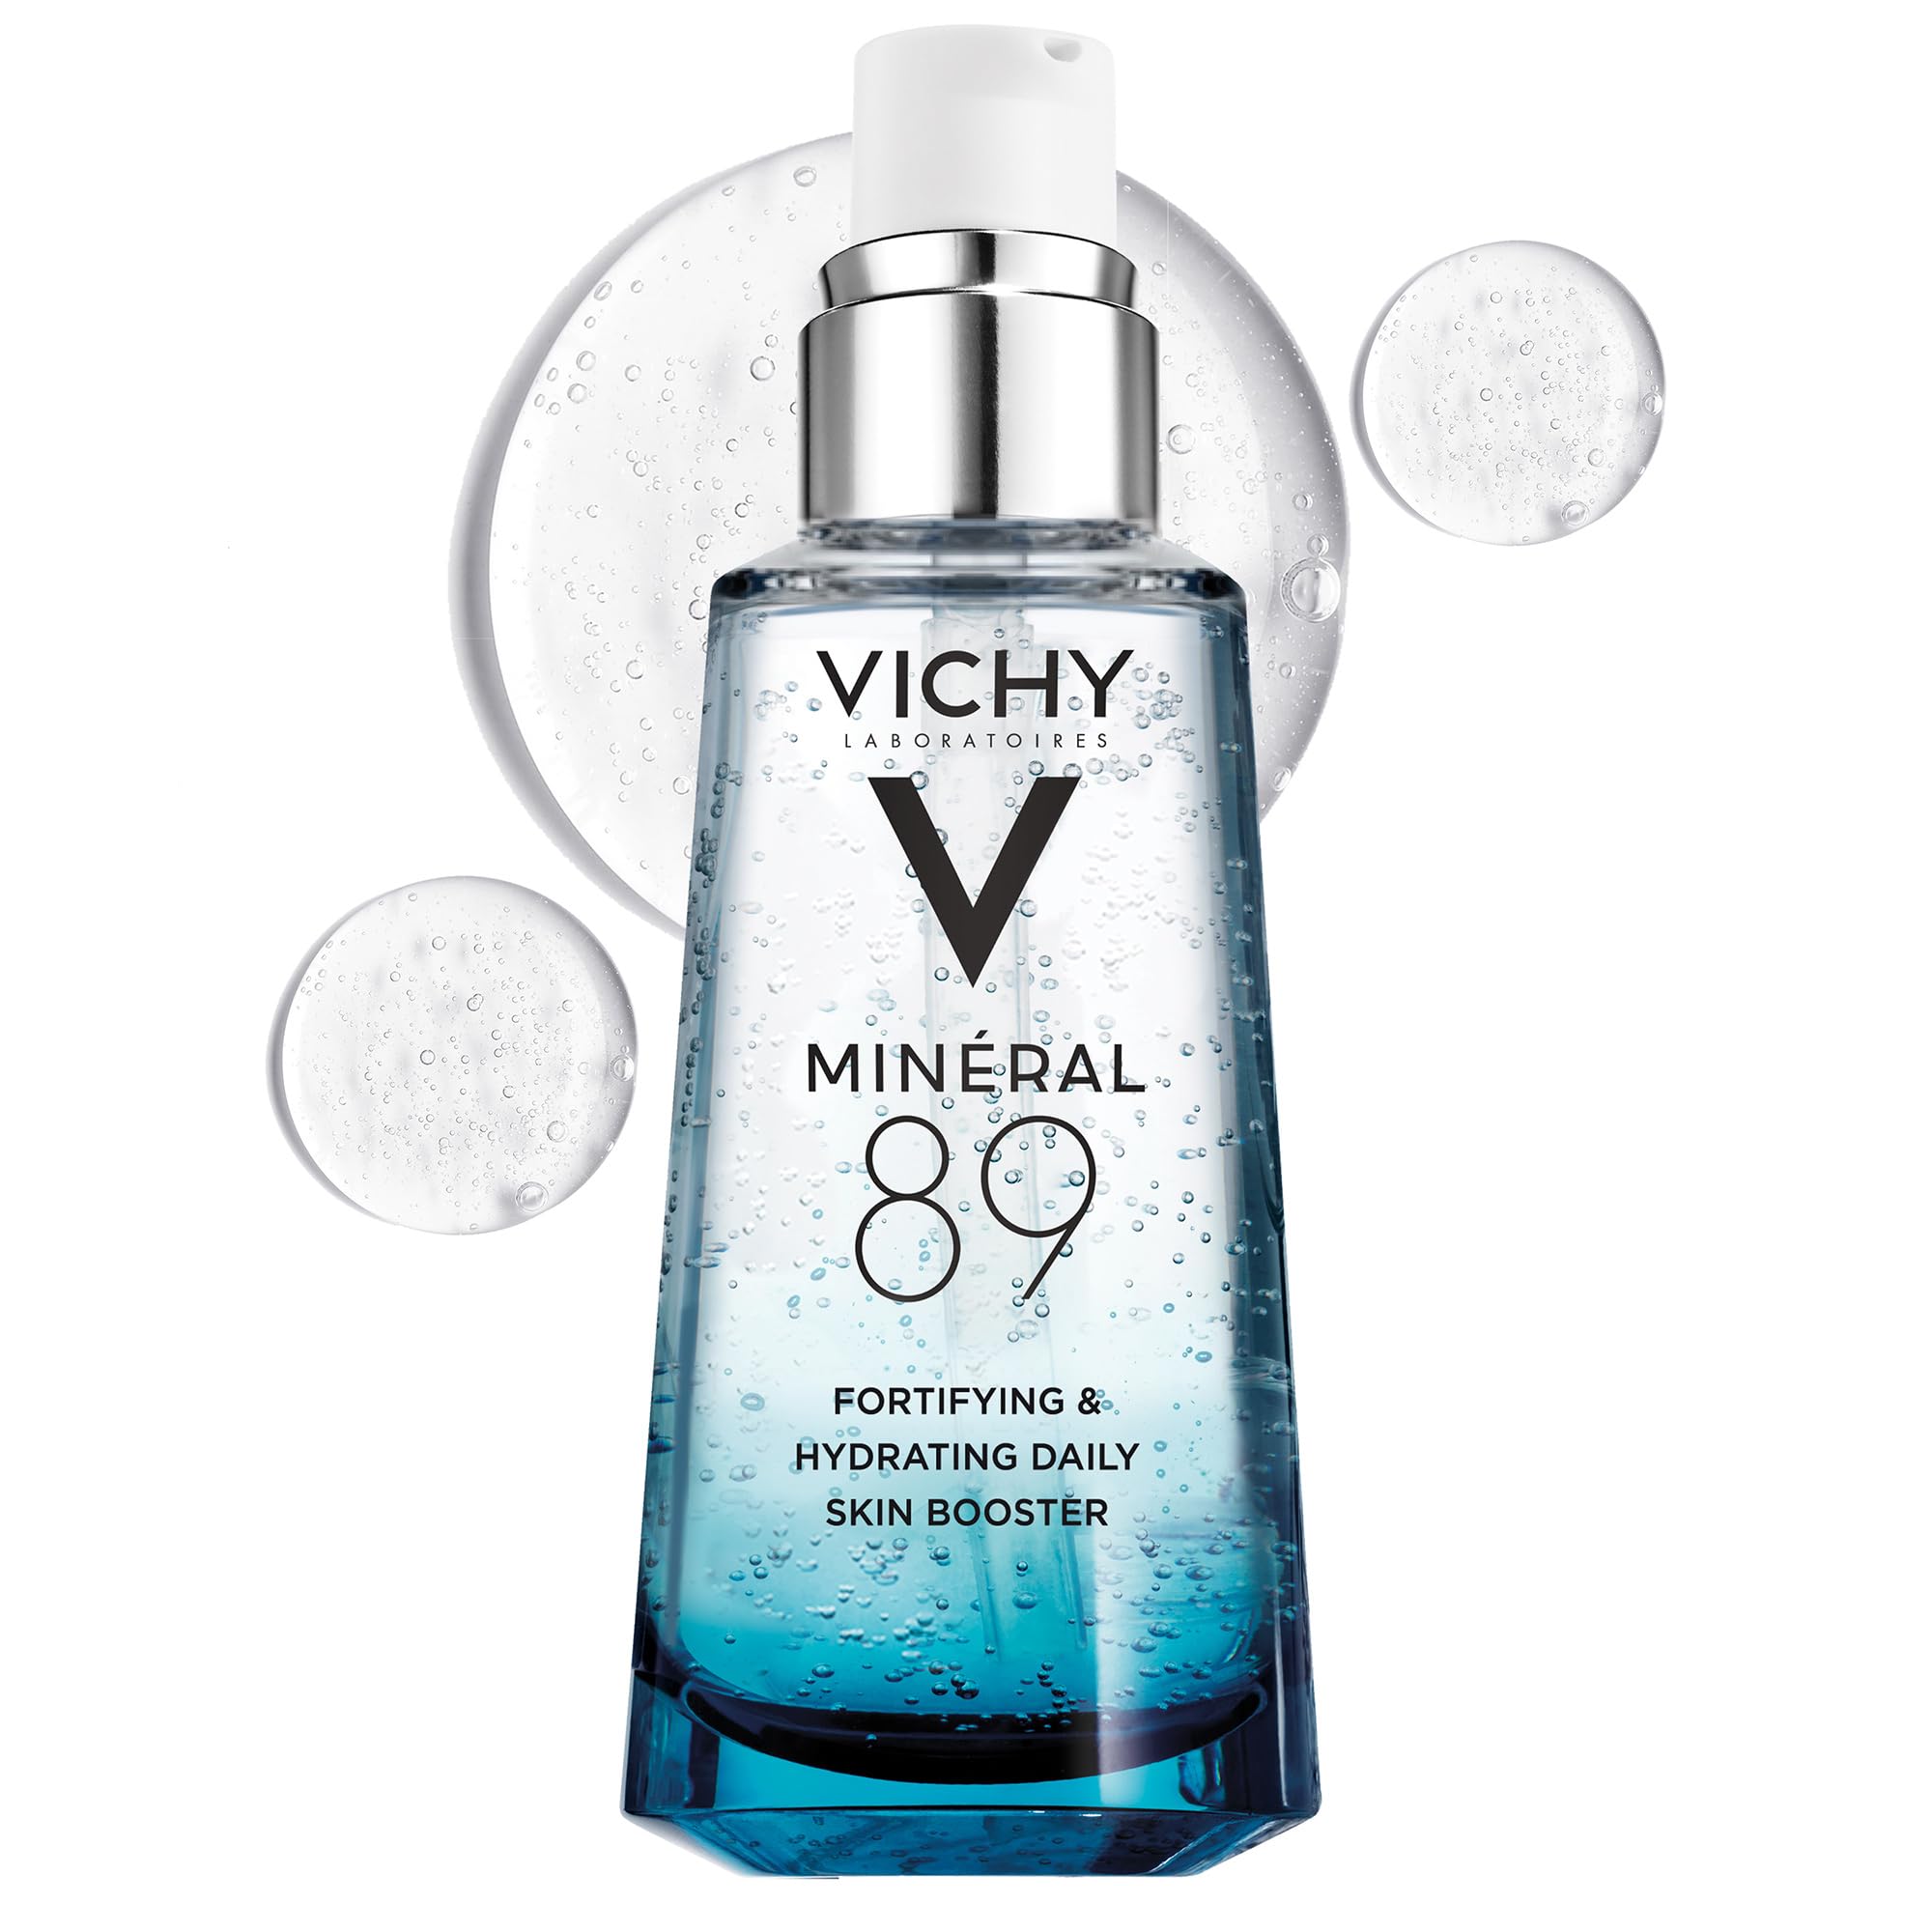 Vichy Mineral 89 Face Serum | Facial Gel Moisturizer and Pure Hyaluronic Acid Moisturizing and Hydrating Serum for Sensitive and Dry Skin | 1.7 Fl. Oz